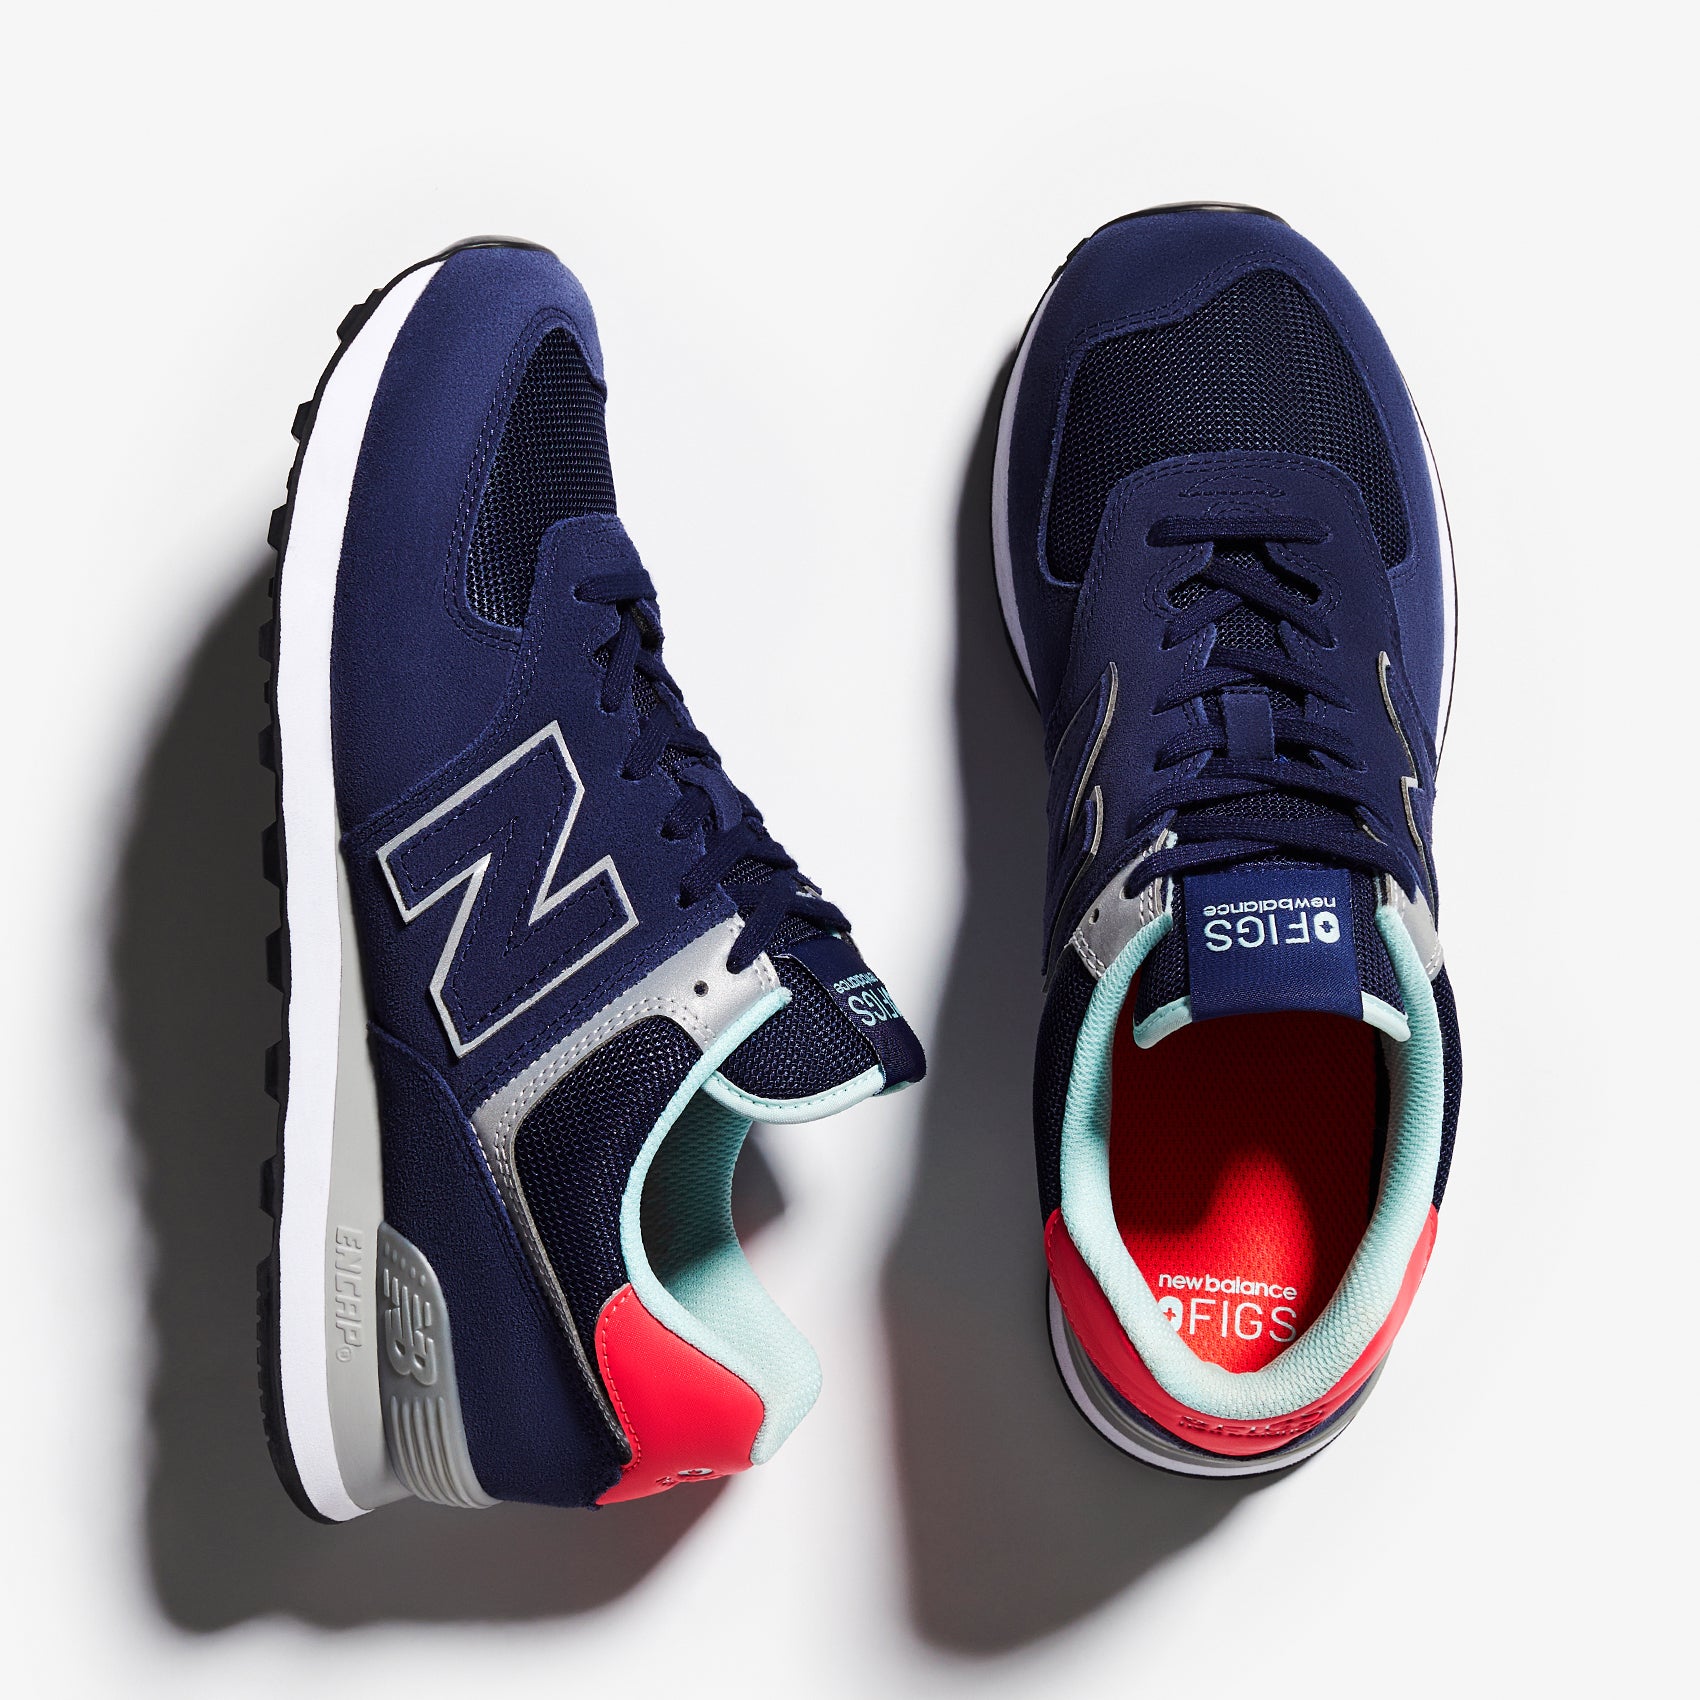 new balance shoes on figs website